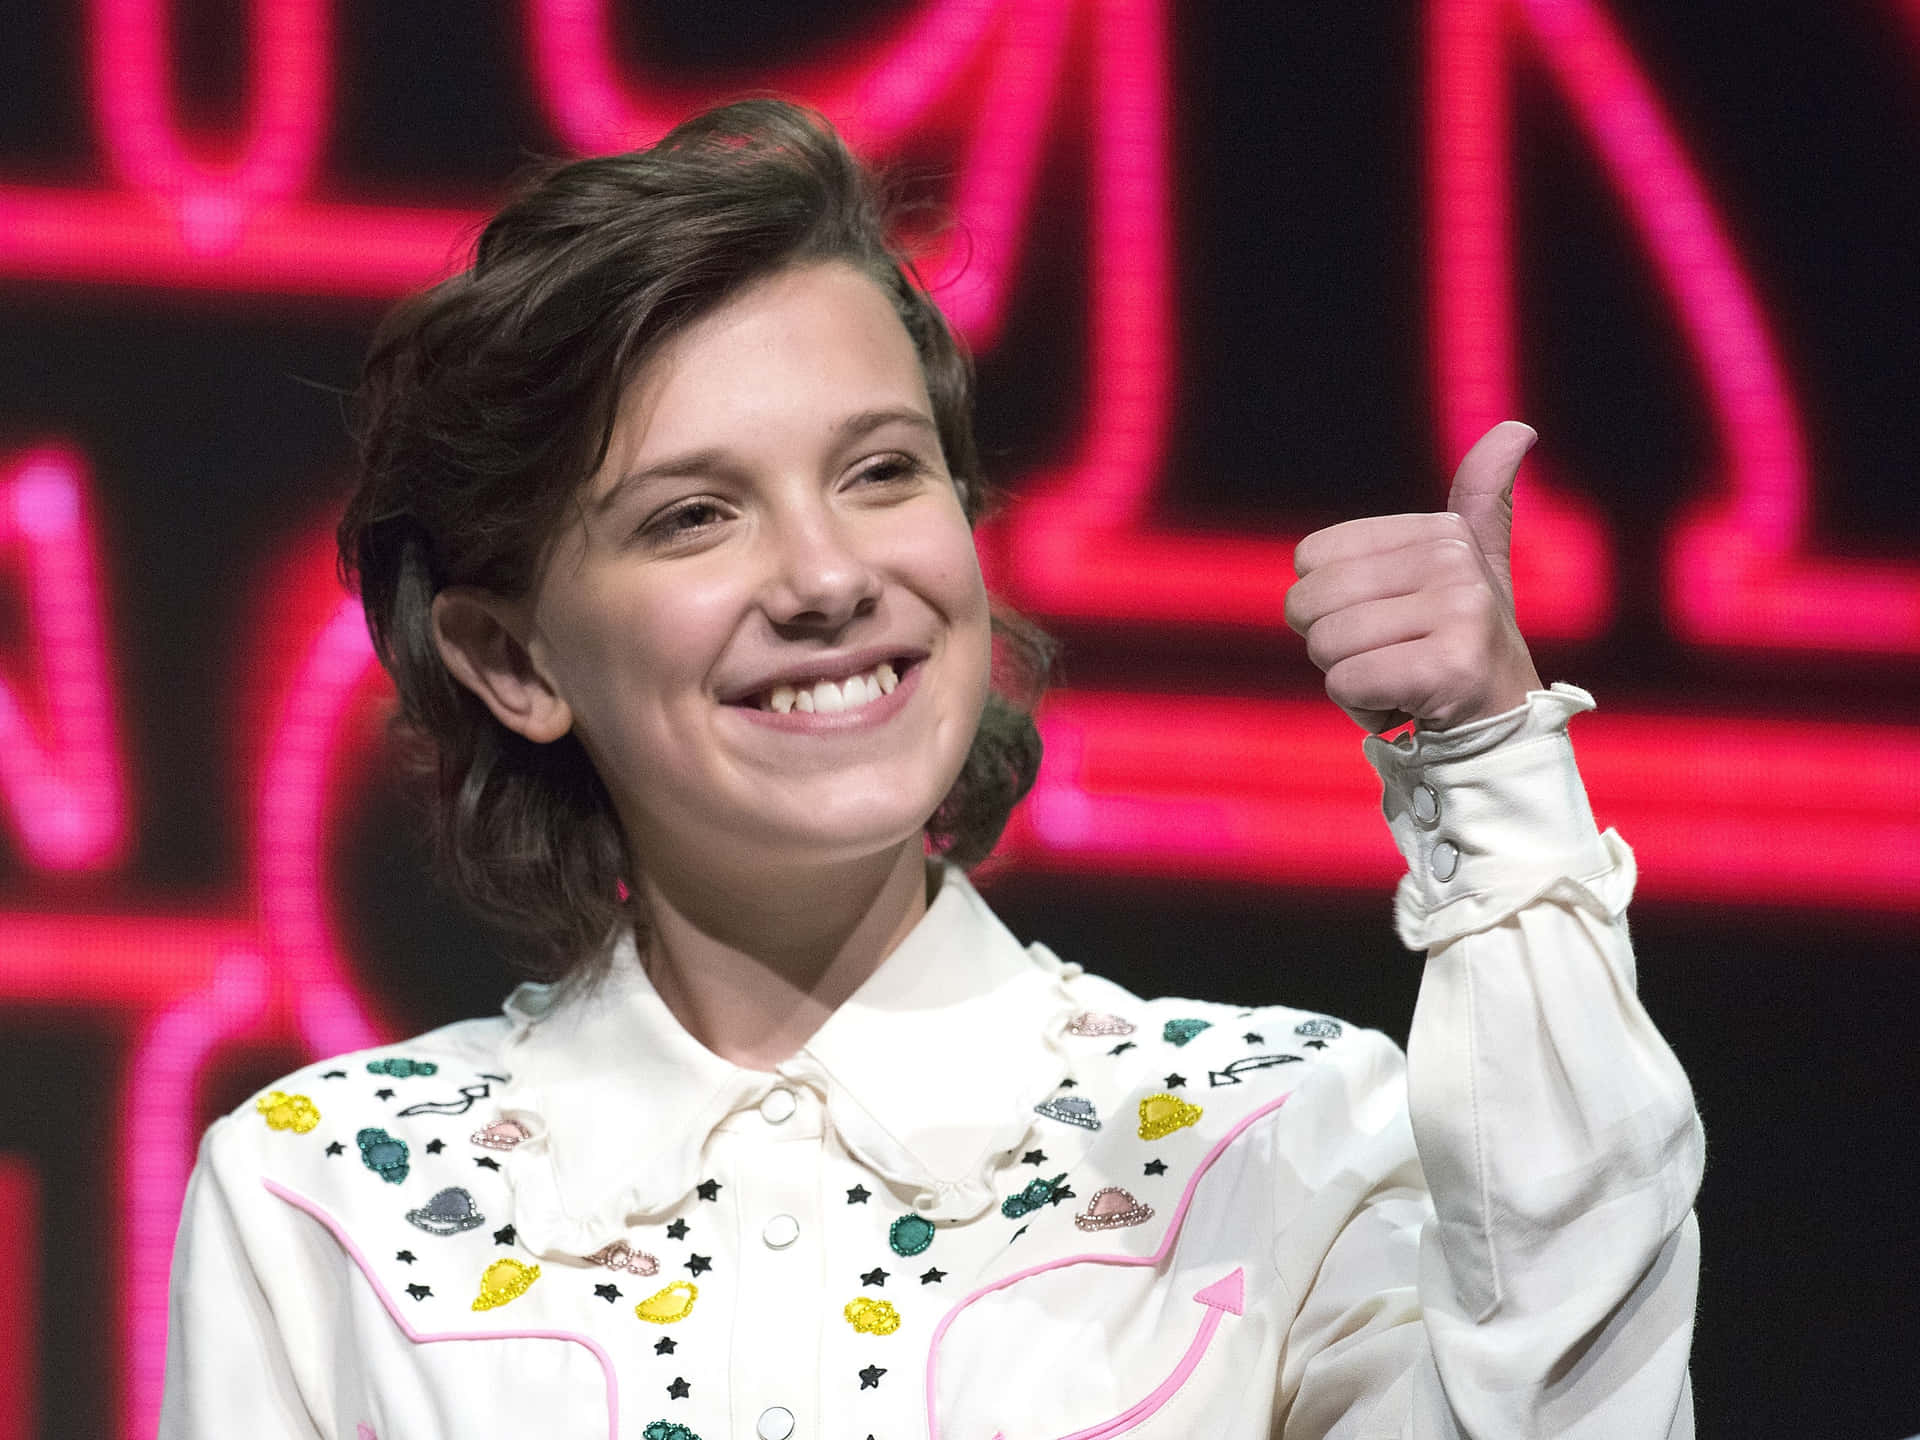 Actress and producer Millie Bobby Brown with a smile on her face